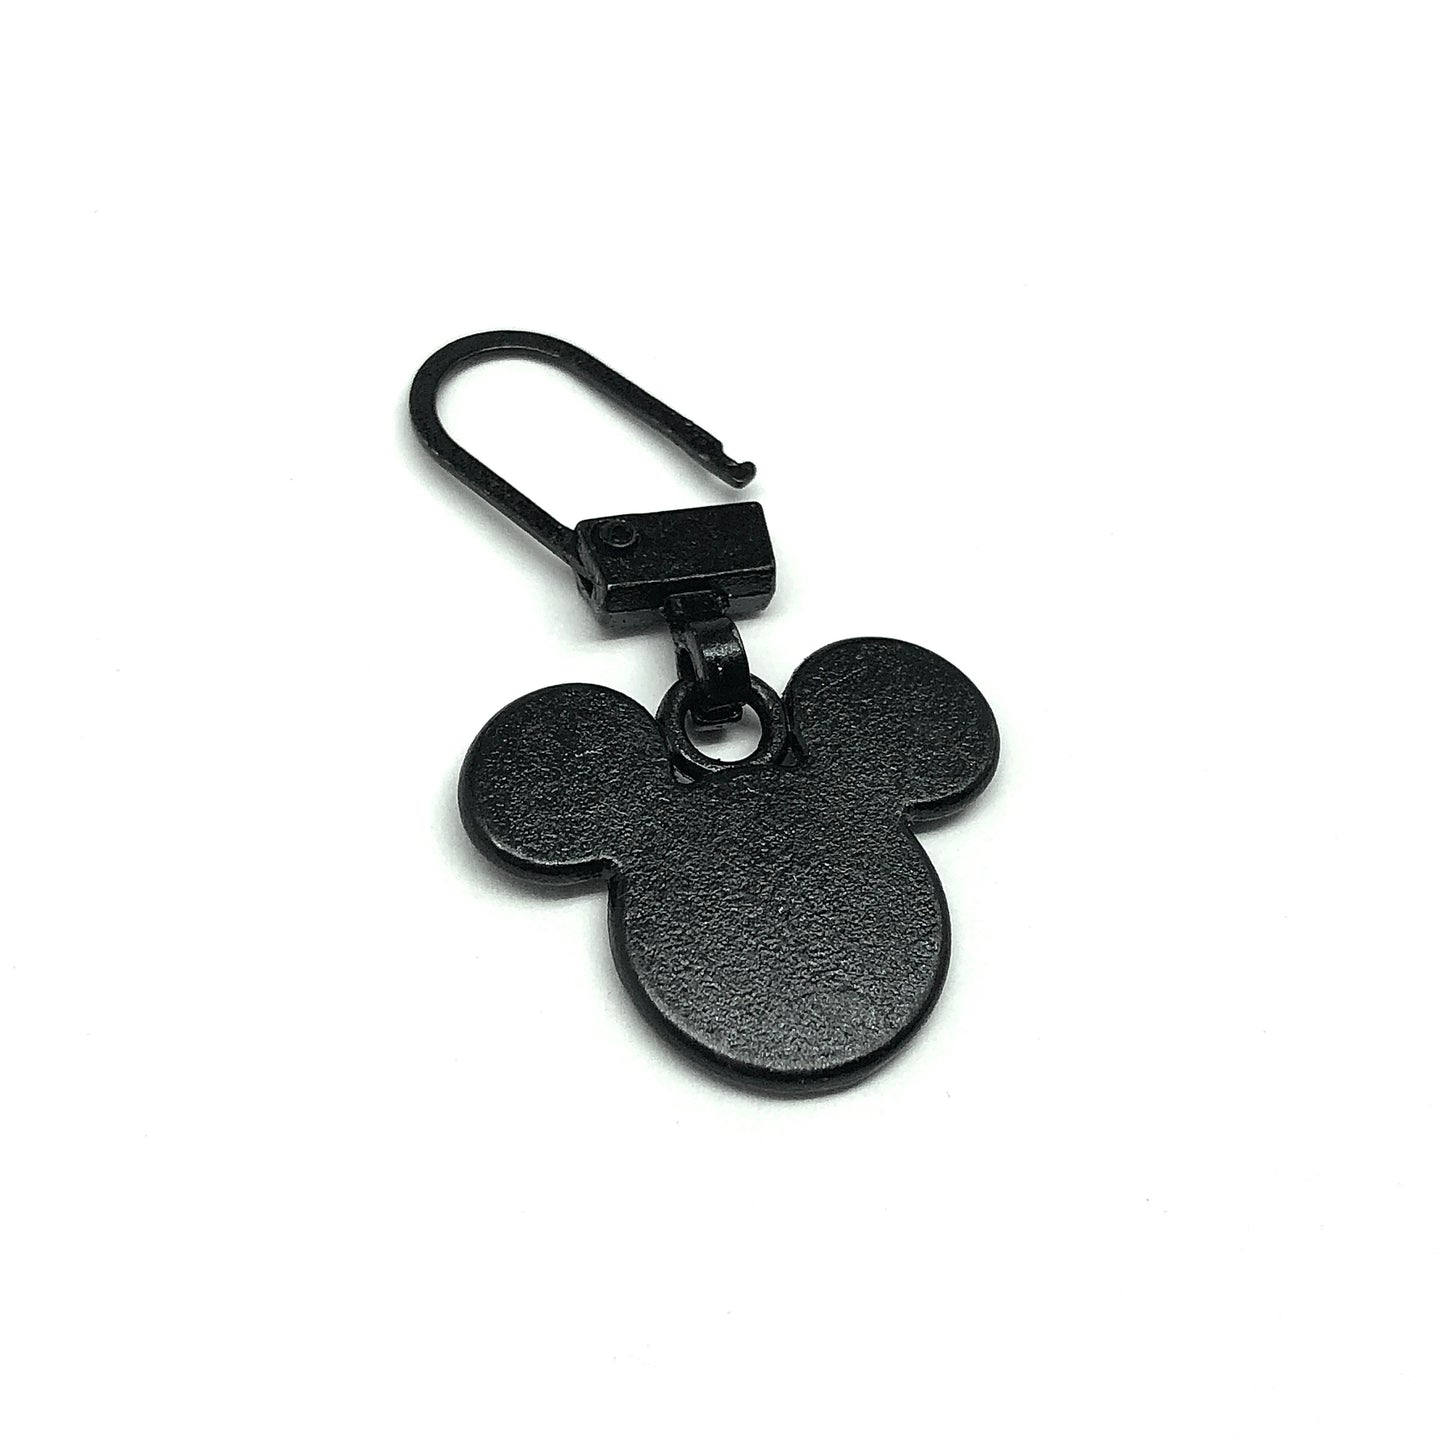 Black Mickey Mouse Silhouette Charm - Zipper Pull Charm for Repair or Decorative Shoe, Purse, Keychain & More | Crafting Supply Accessories